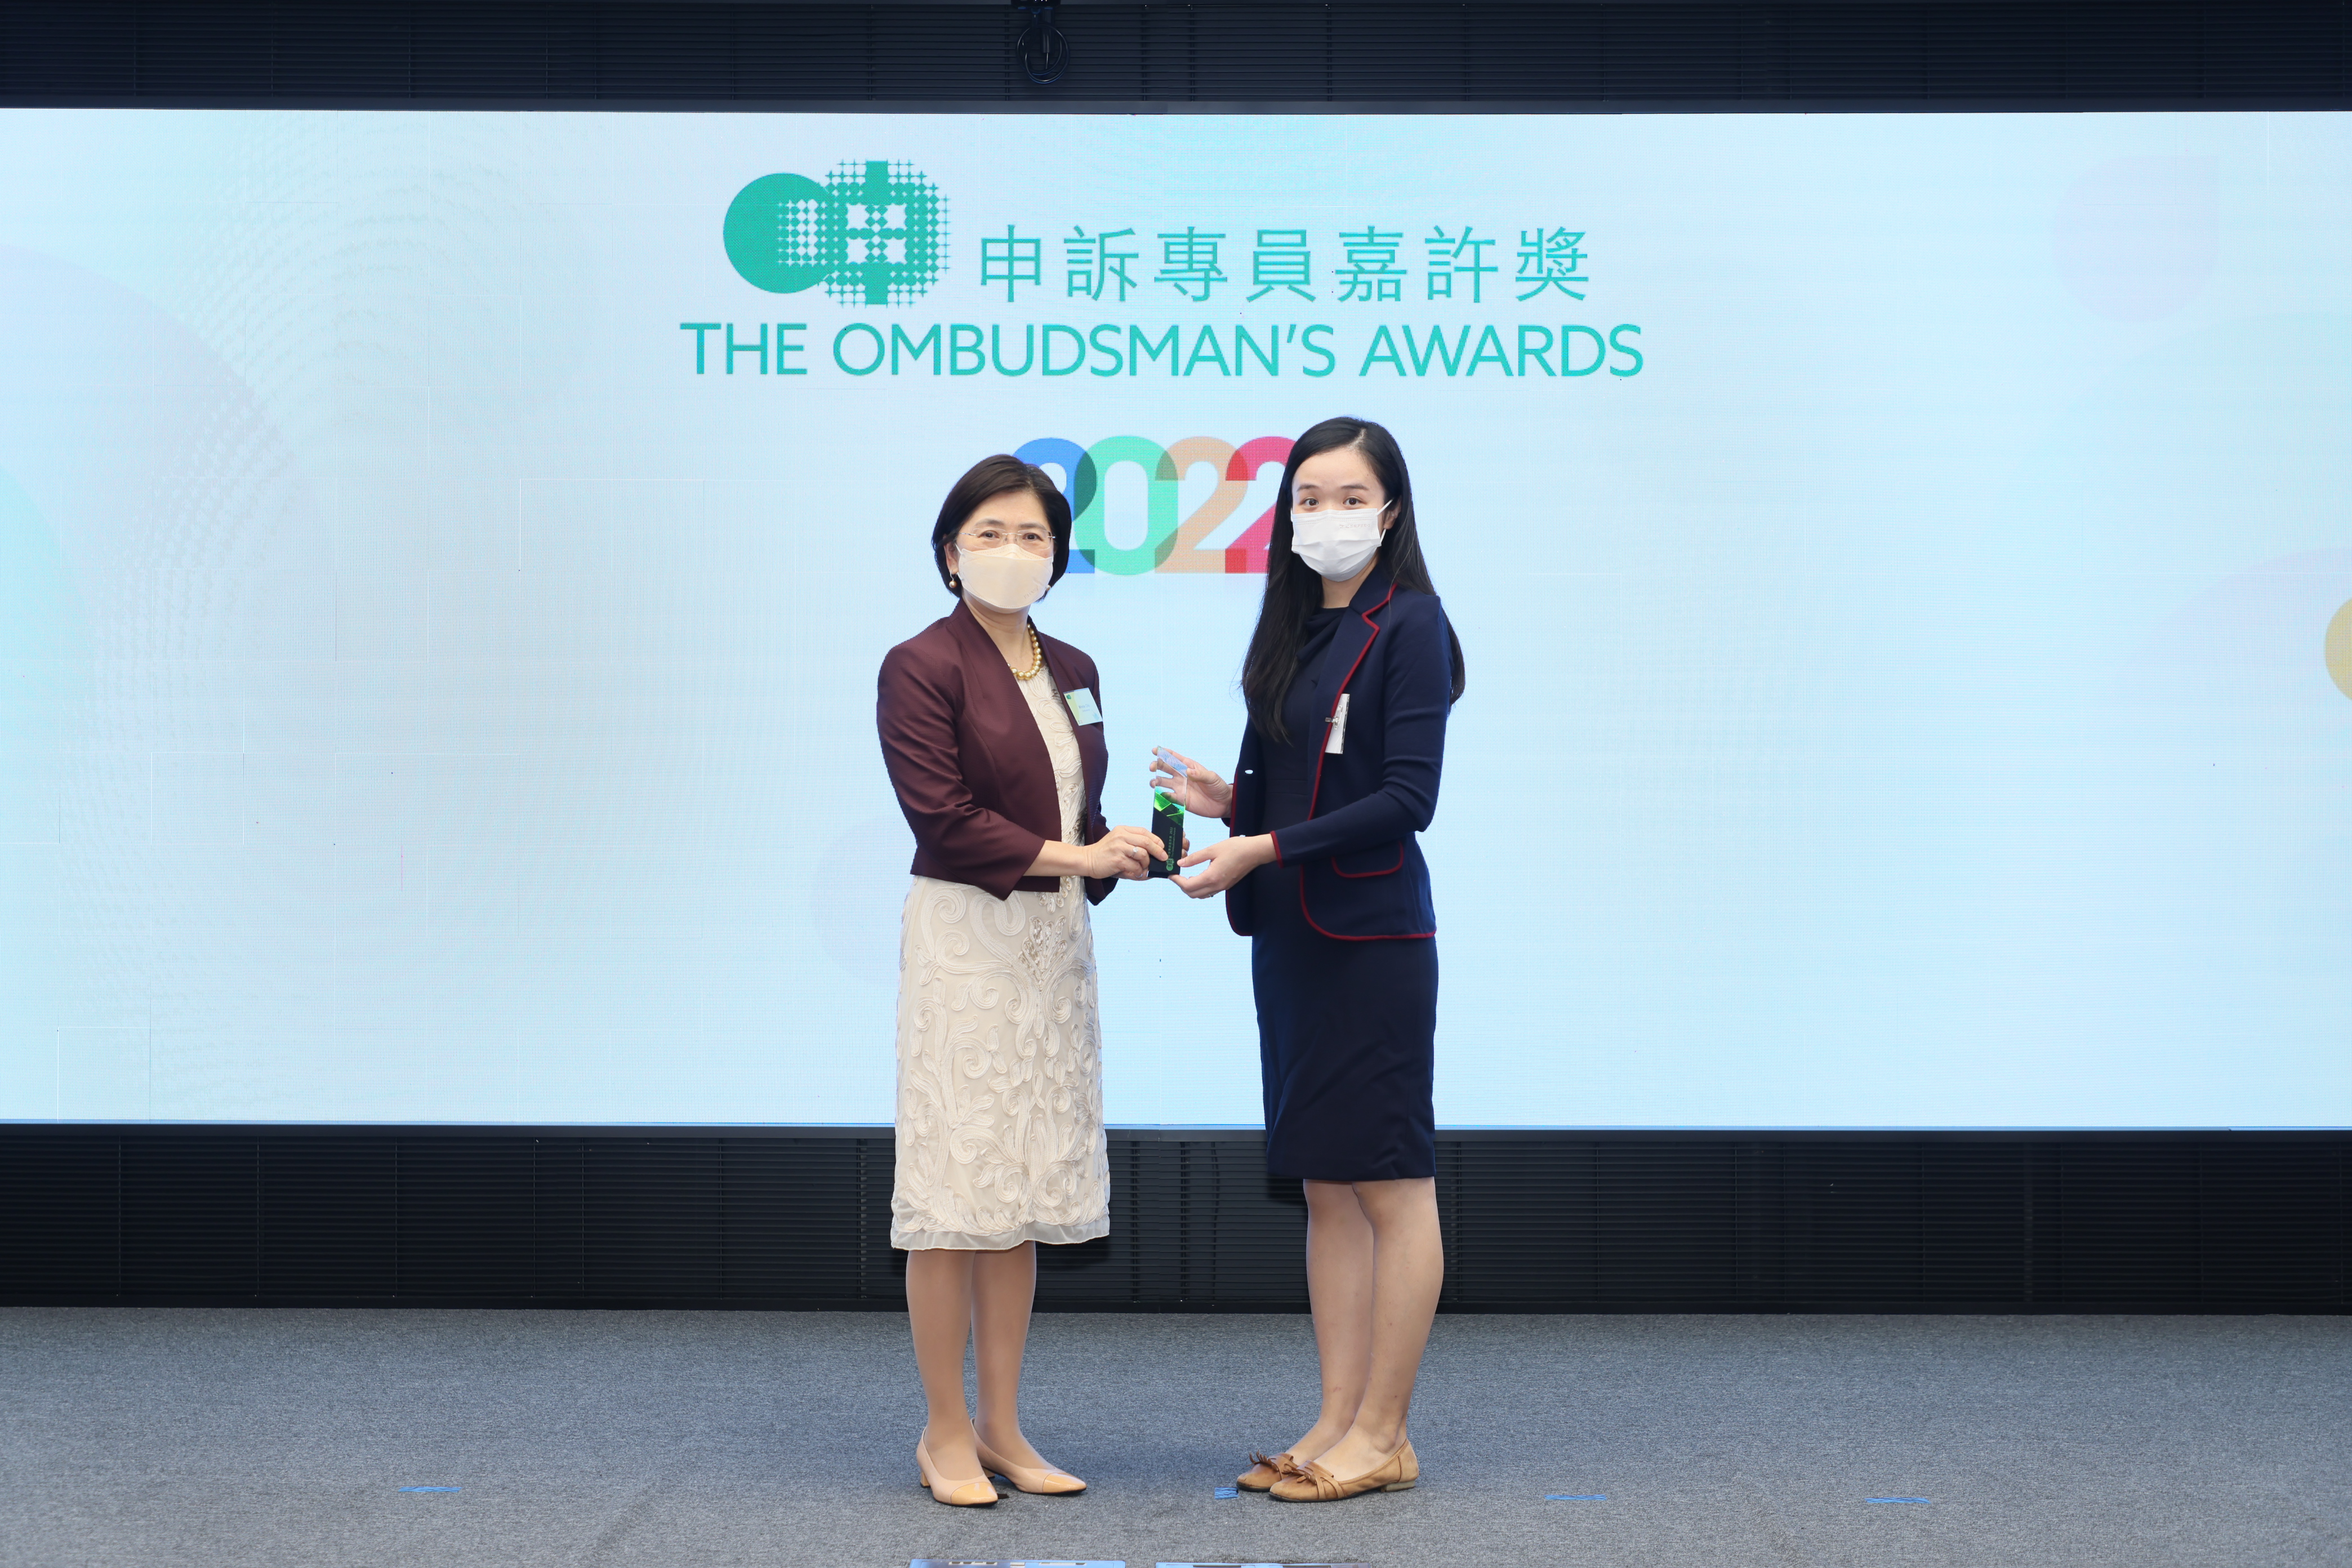 Ms Yan Wong, Companies Registration Officer I (right), received the Award at the Award Presentation Ceremony.